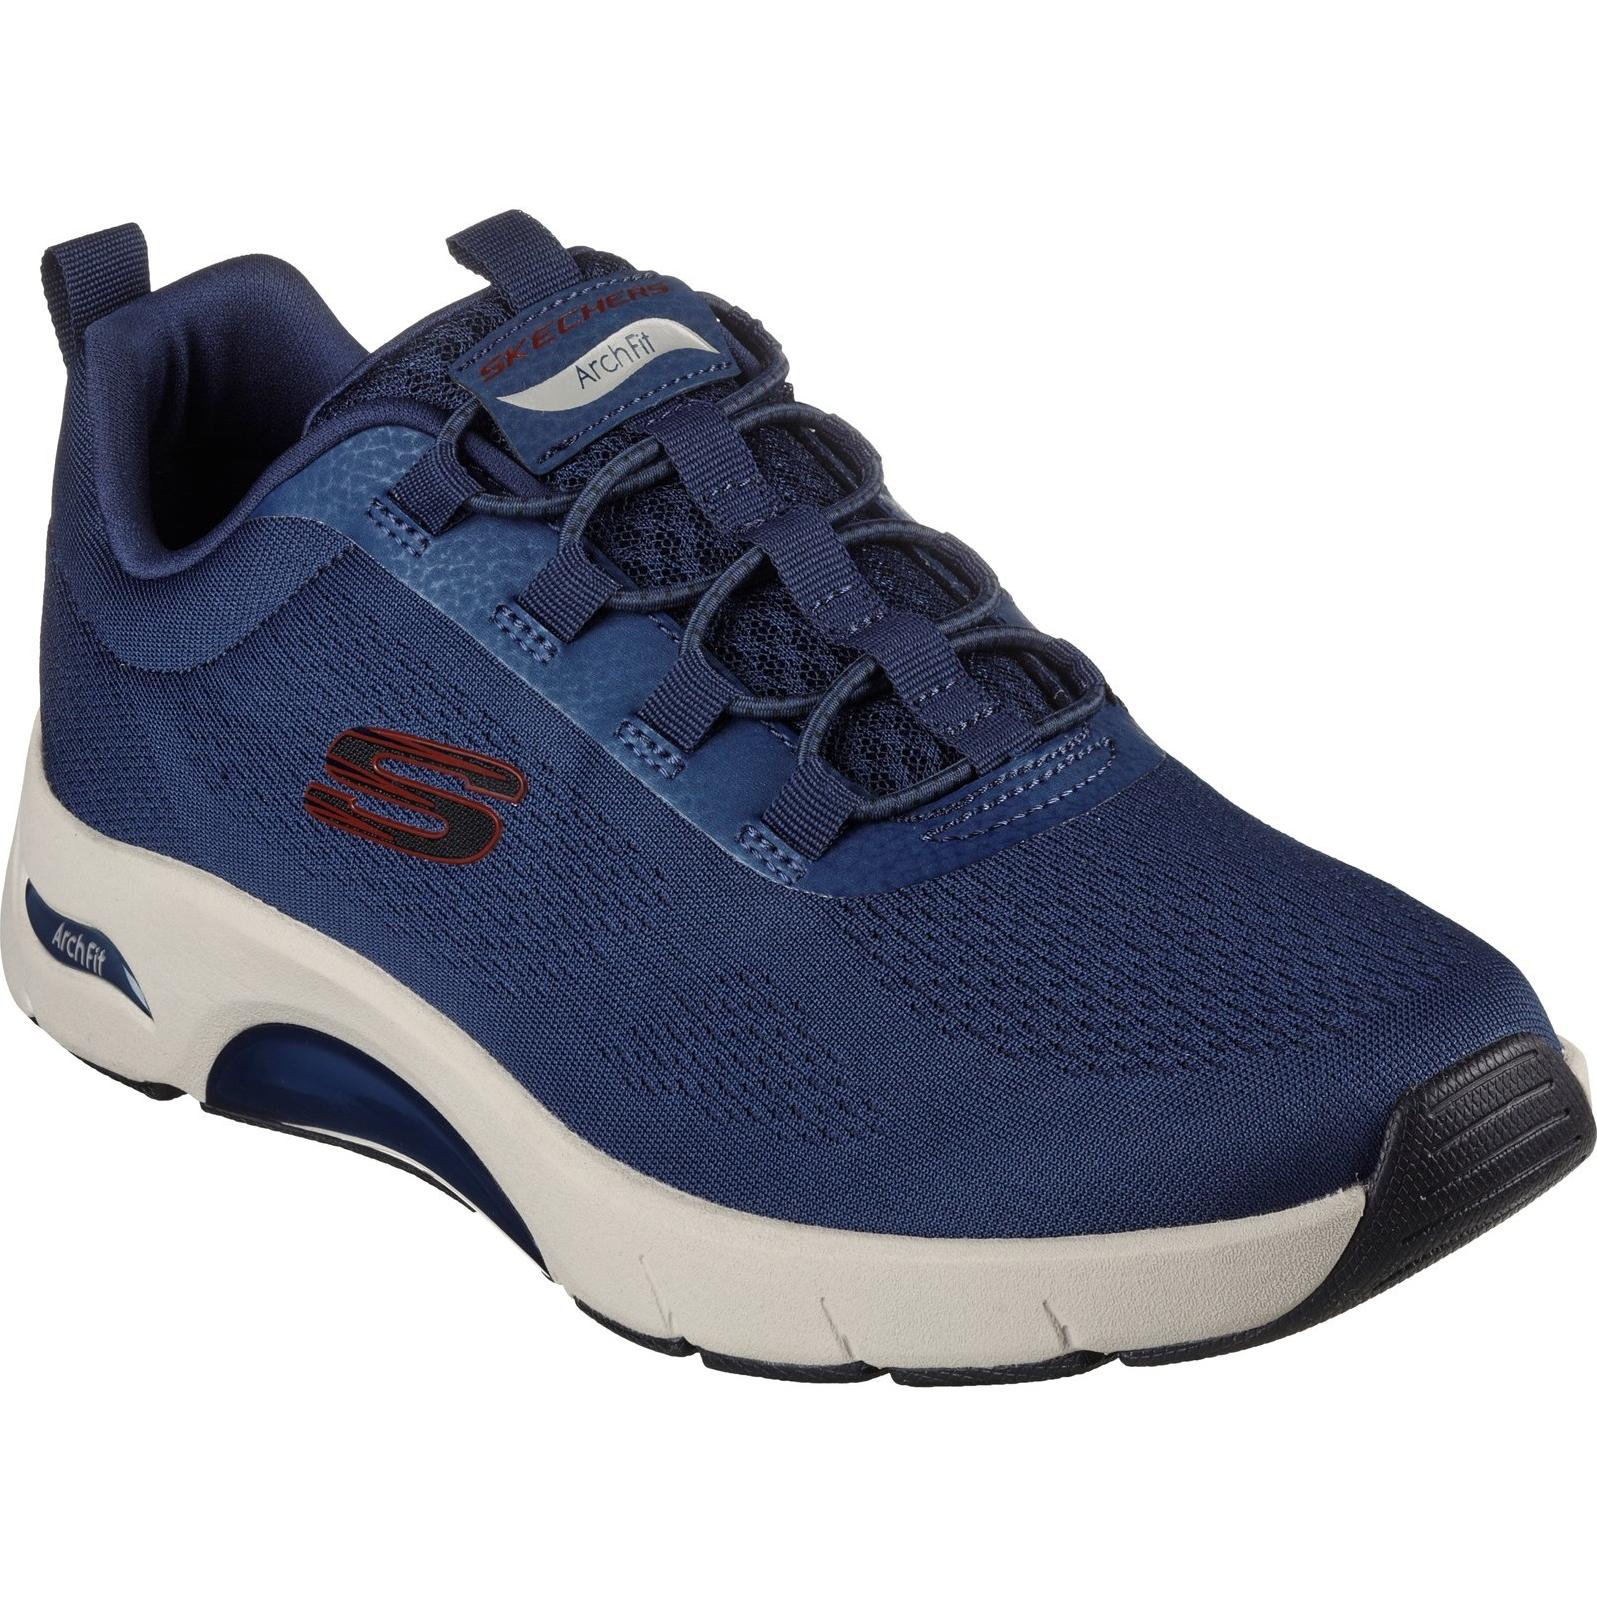 Skechers Skech-Air Arch Fit - Billo Shoes